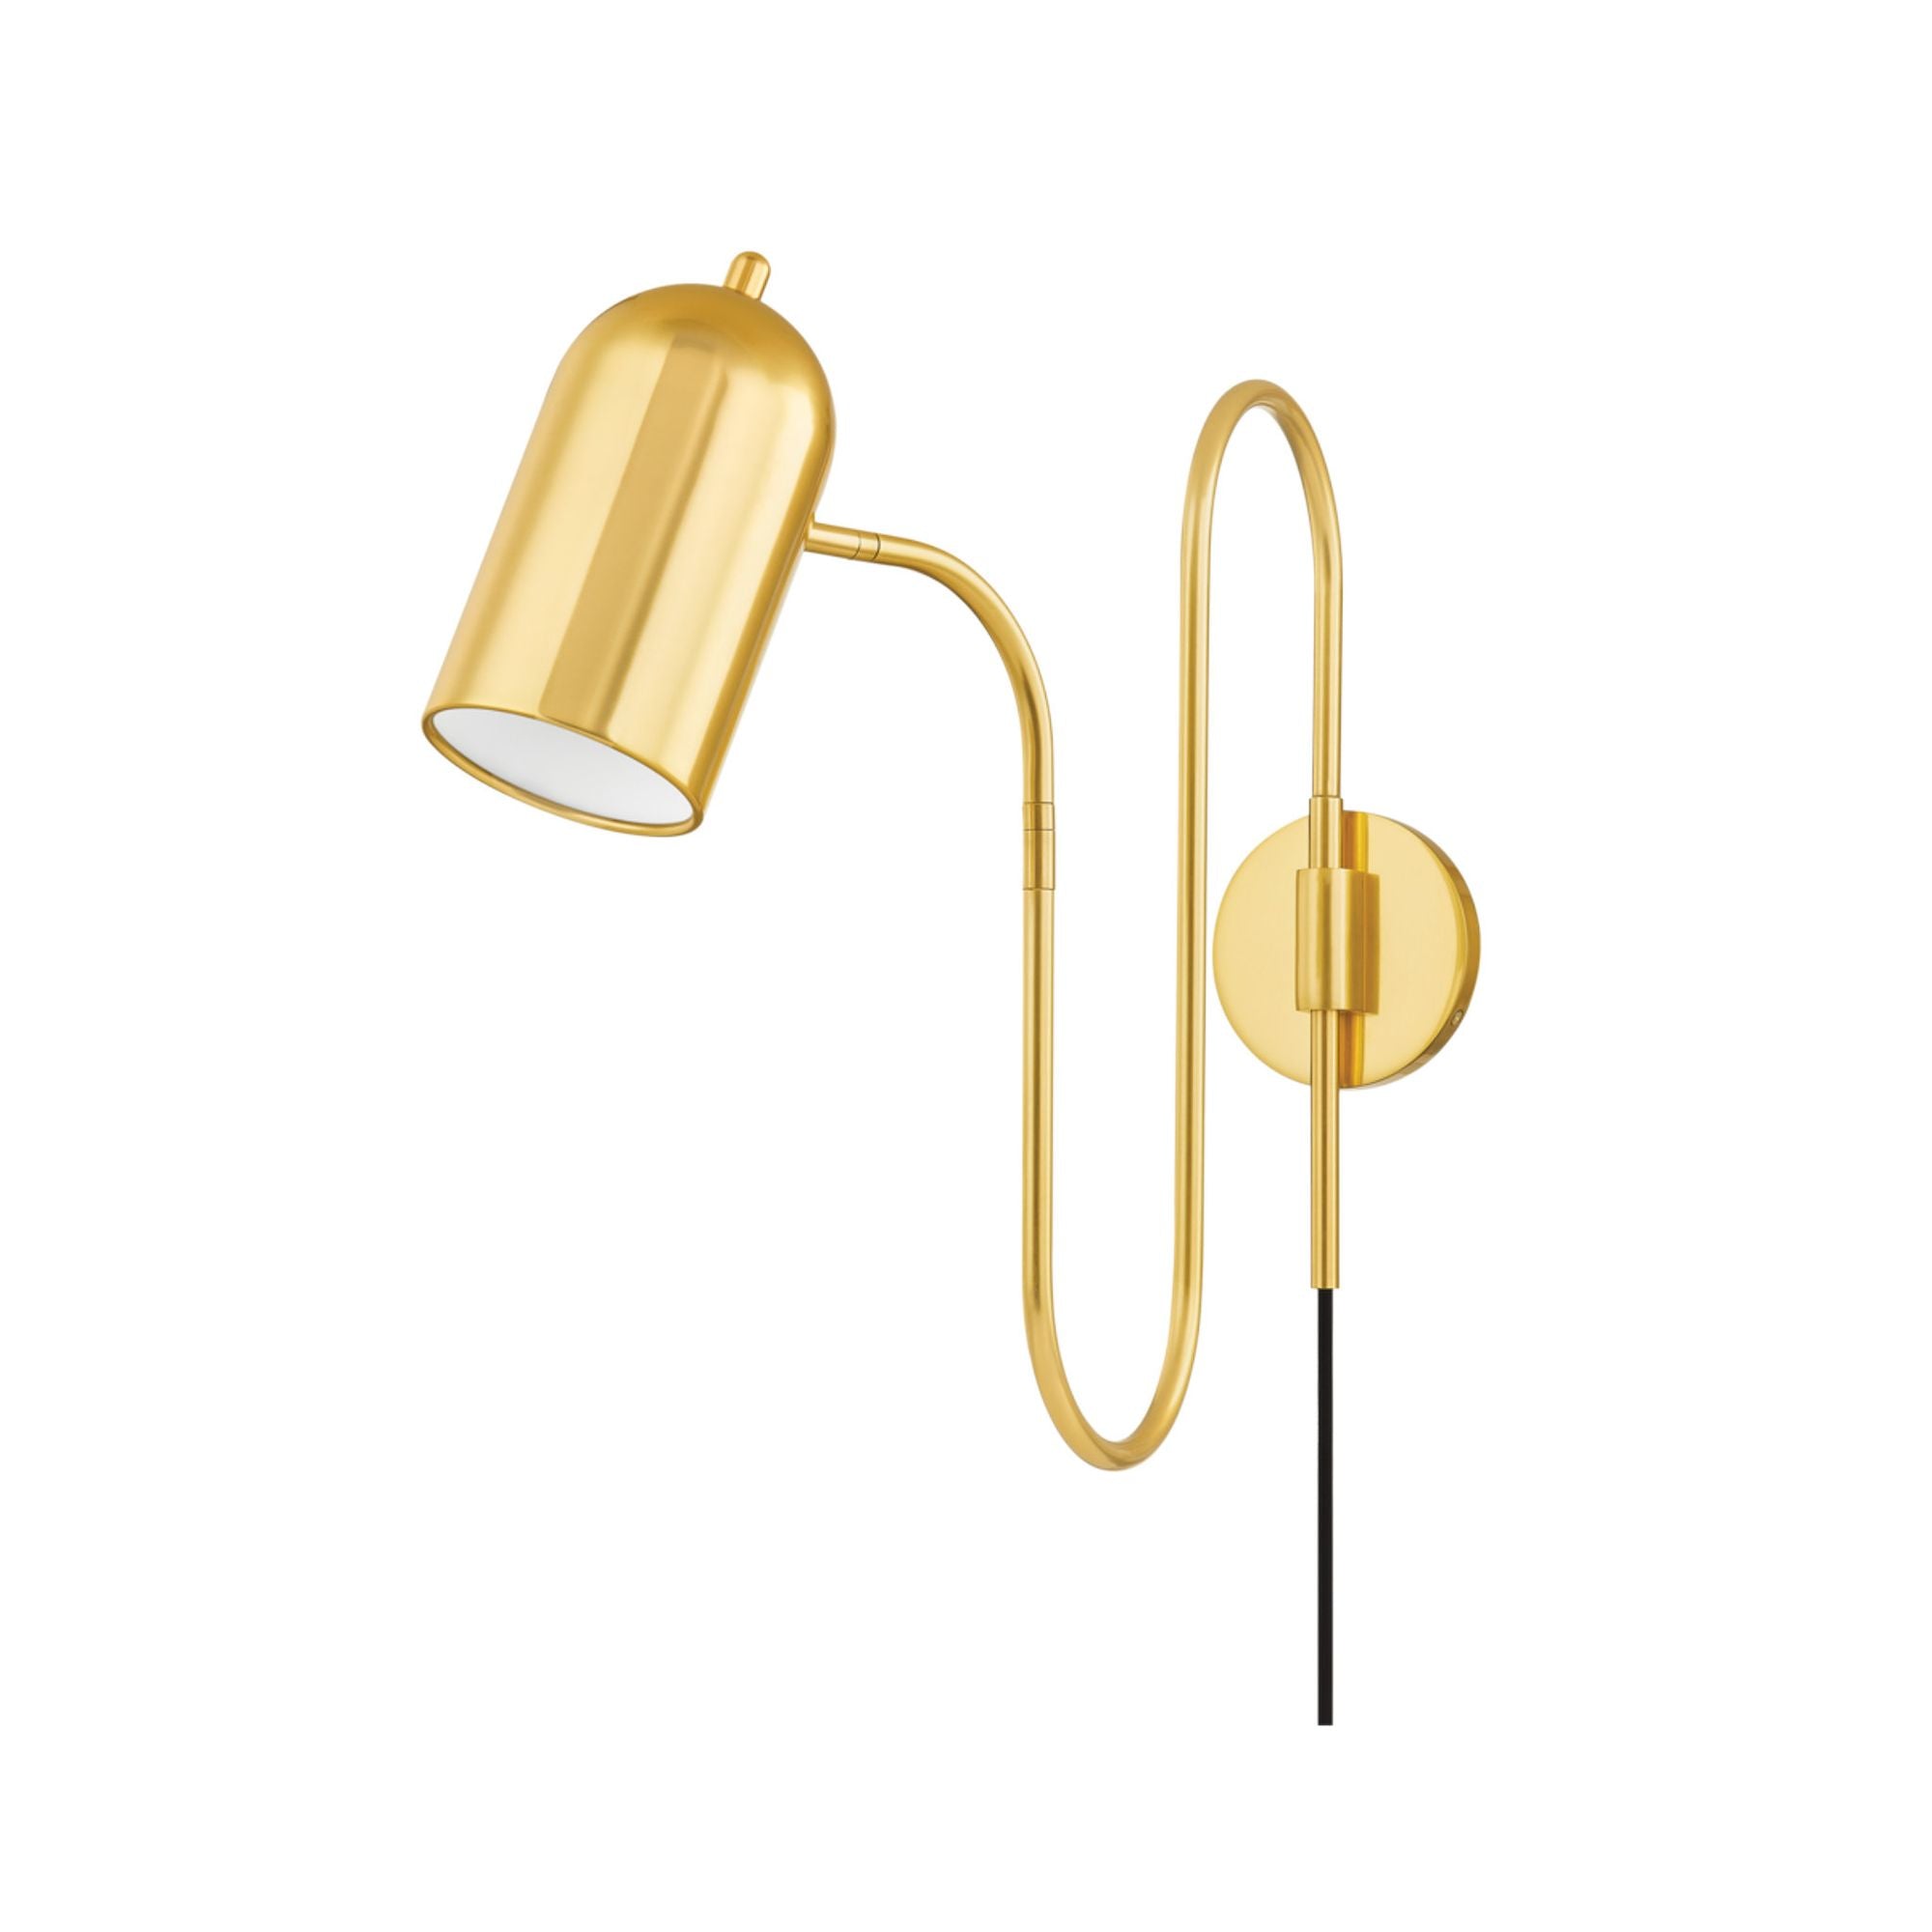 Romee 1-Light Plug-in Sconce in Aged Brass by The Lifestyled Co